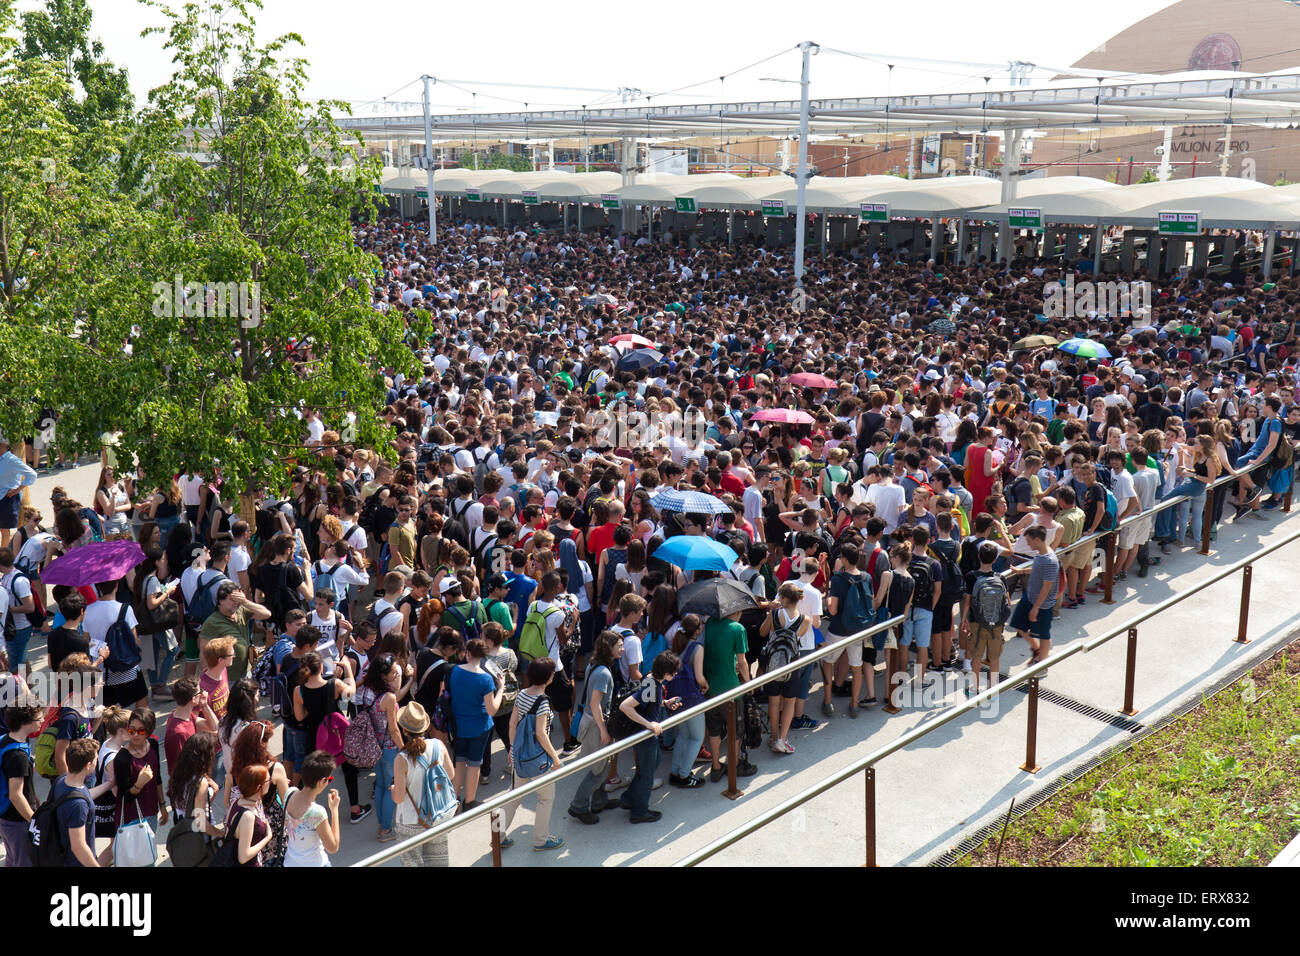 MILAN, ITALY - June 04, 2015: crowd at the gate  EXPO 2015 Stock Photo